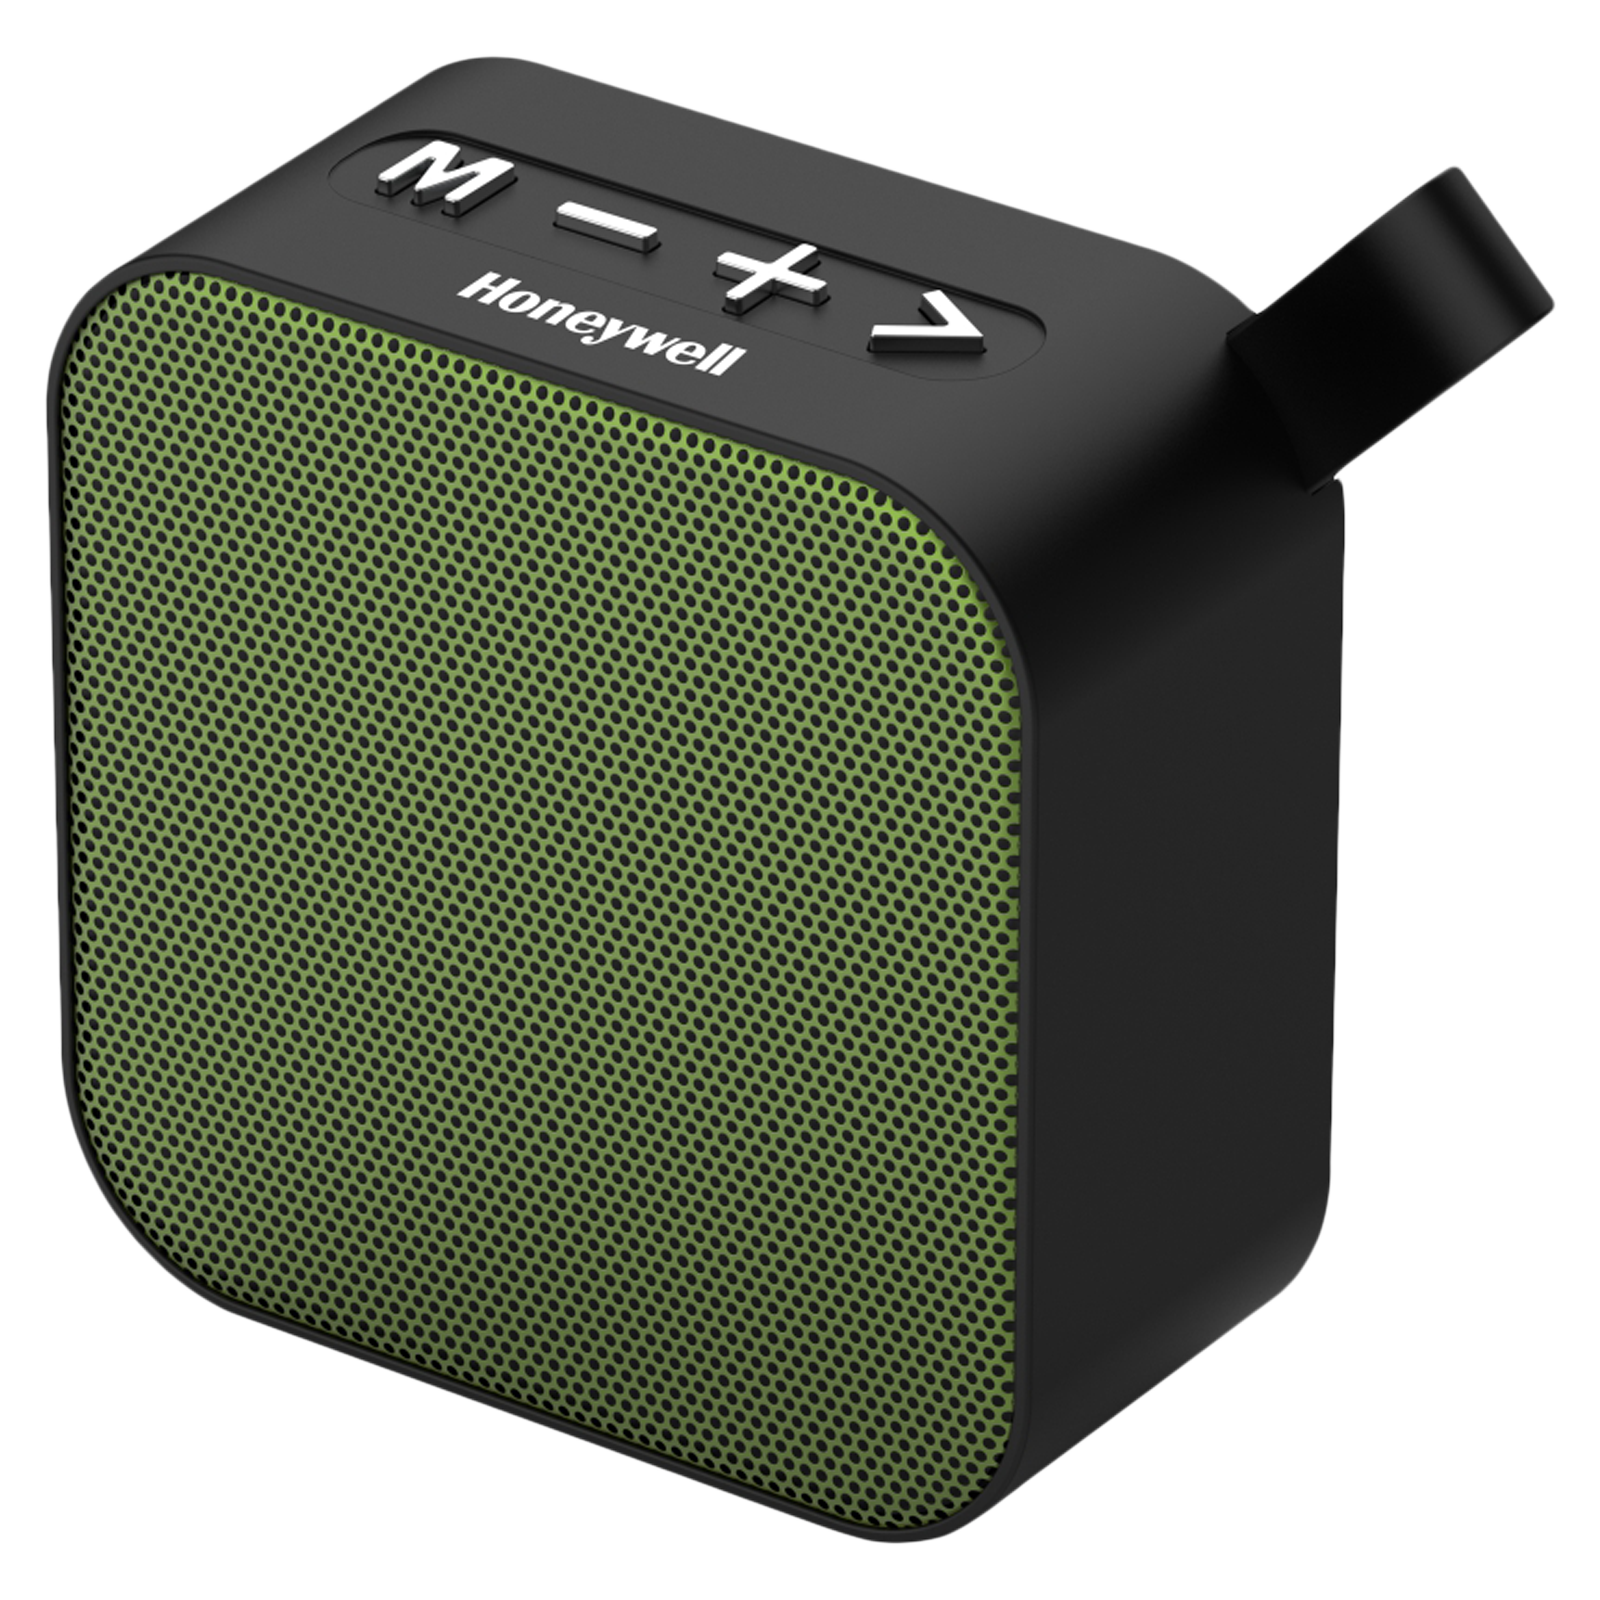 Honeywell Moxie V100 3W Portable Bluetooth Speaker (IPX4 Water Resistant, Stereo Sound, 2.1 Channel, Olive Green)